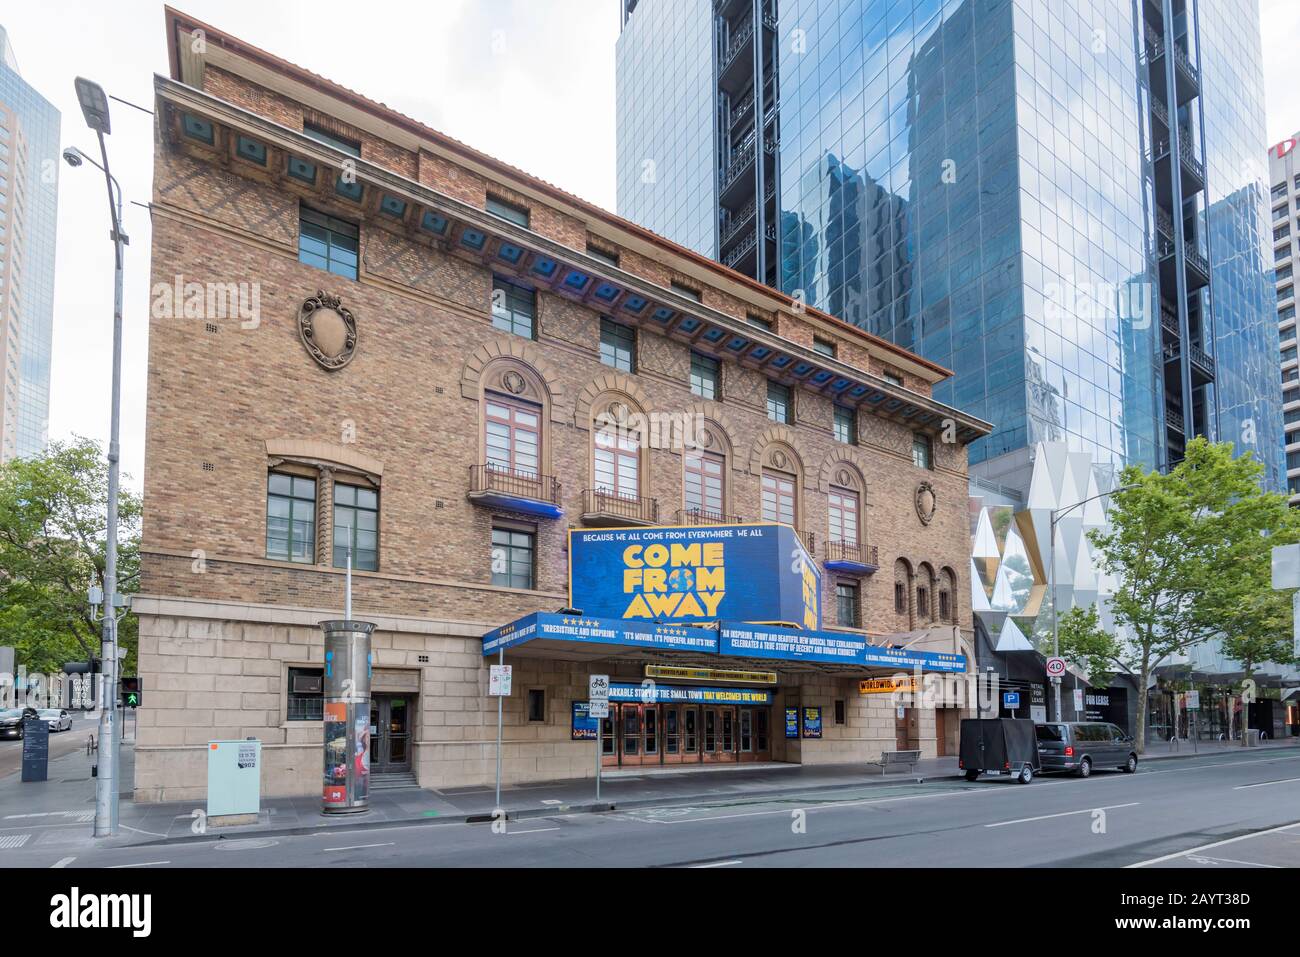 The Melbourne Comedy Theatre was built in 1928 and designed in the Spanish style with a Florentine-style exterior and wrought-iron balconies Stock Photo